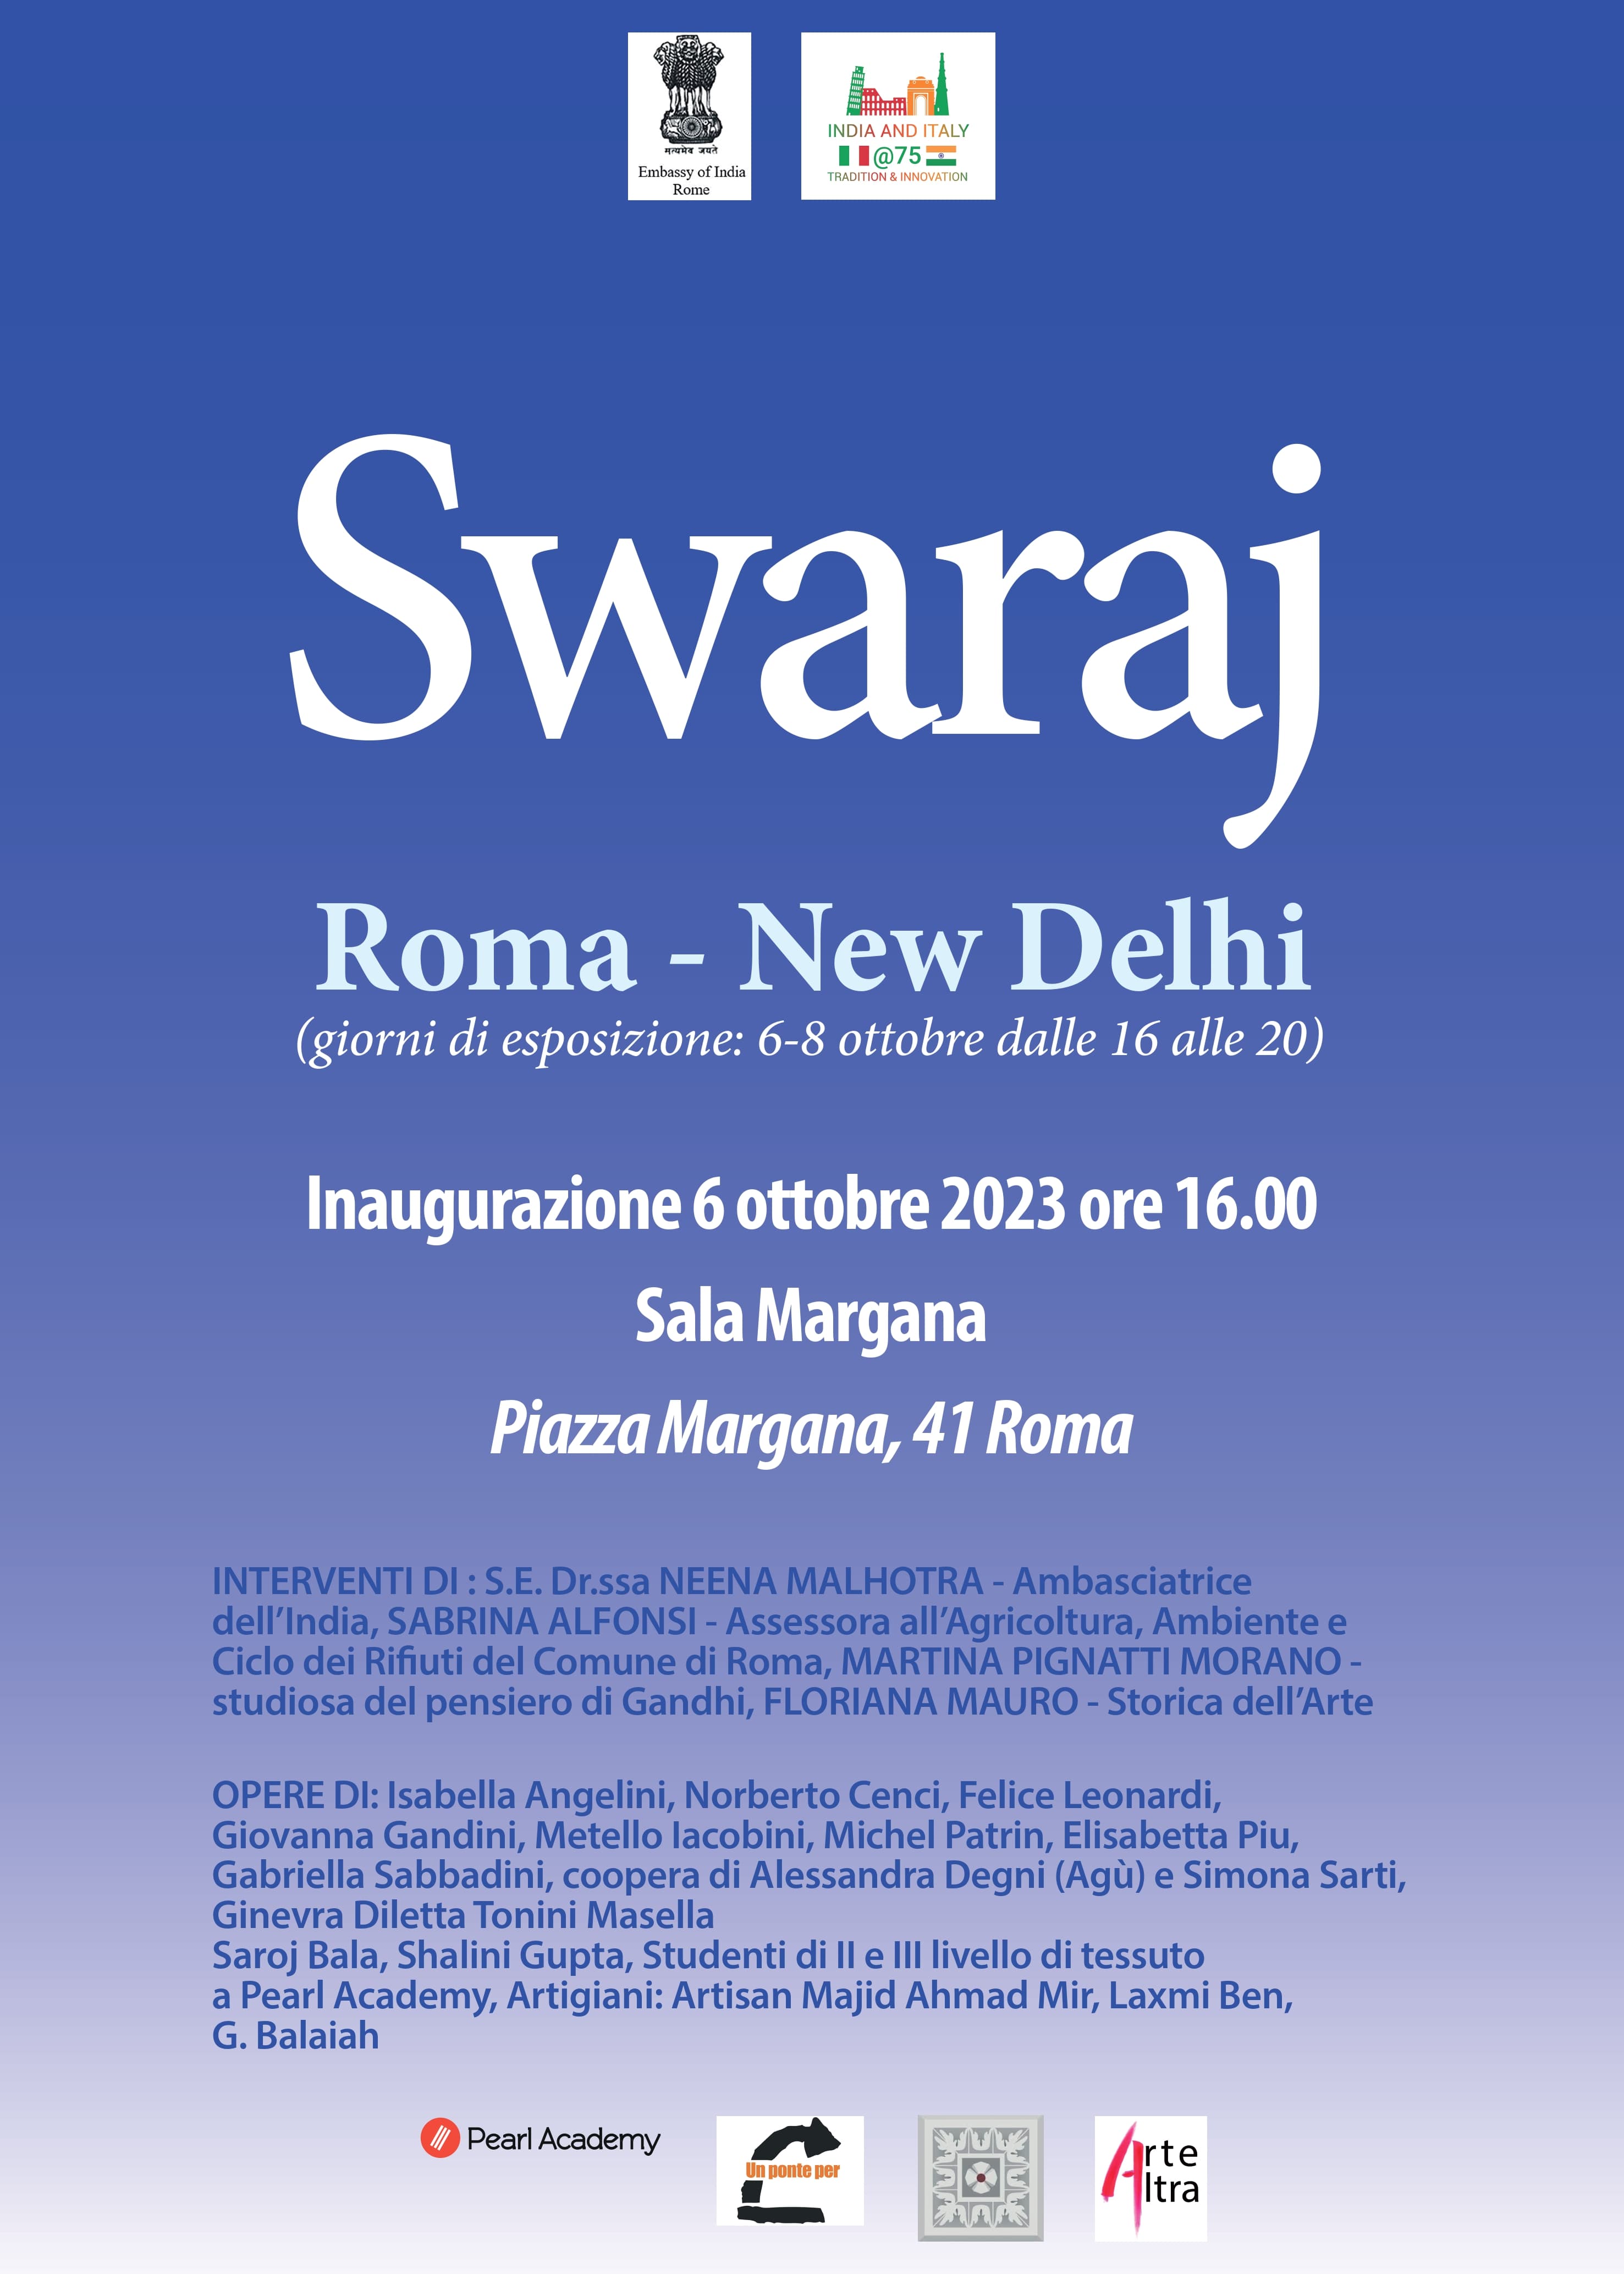 Inauguration of "Swaraj" exhibition in Rome (October 6, 2023 from 16:00 hrs)